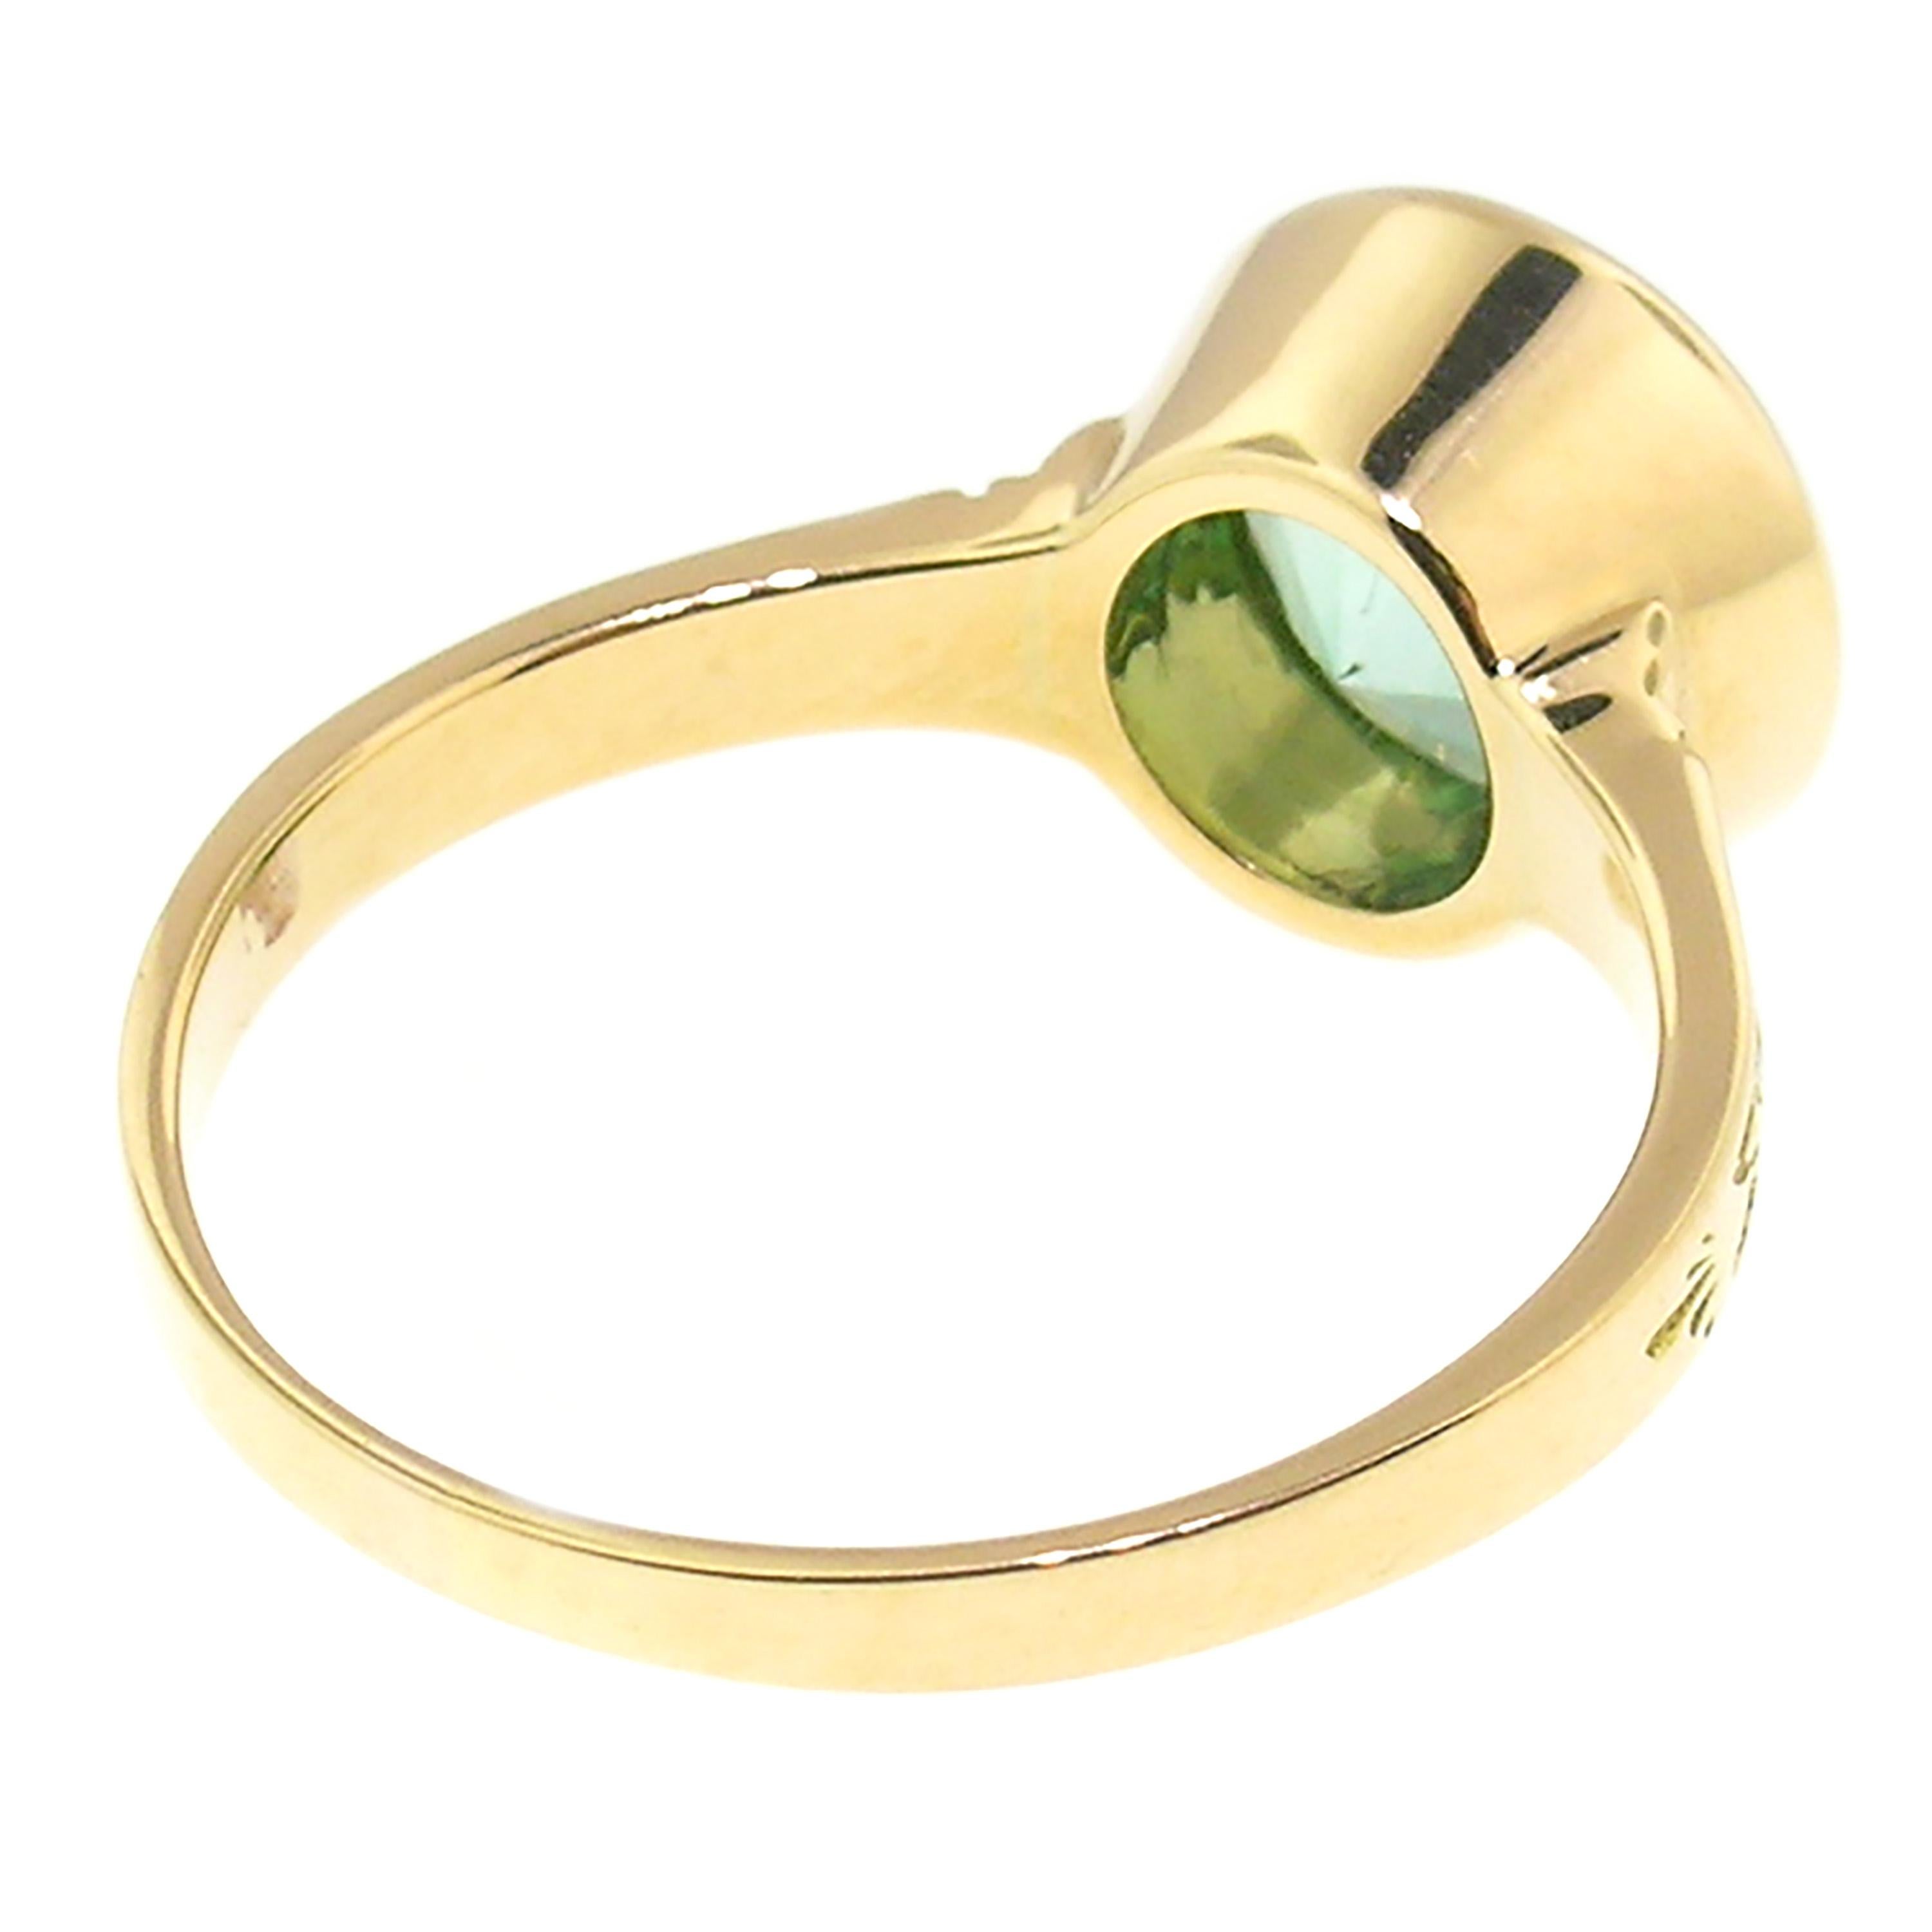 2.40ct Mint Green Tourmaline in 18kt Cassandra Ring by Cynthia Scott Jewelry In New Condition For Sale In Logan, UT